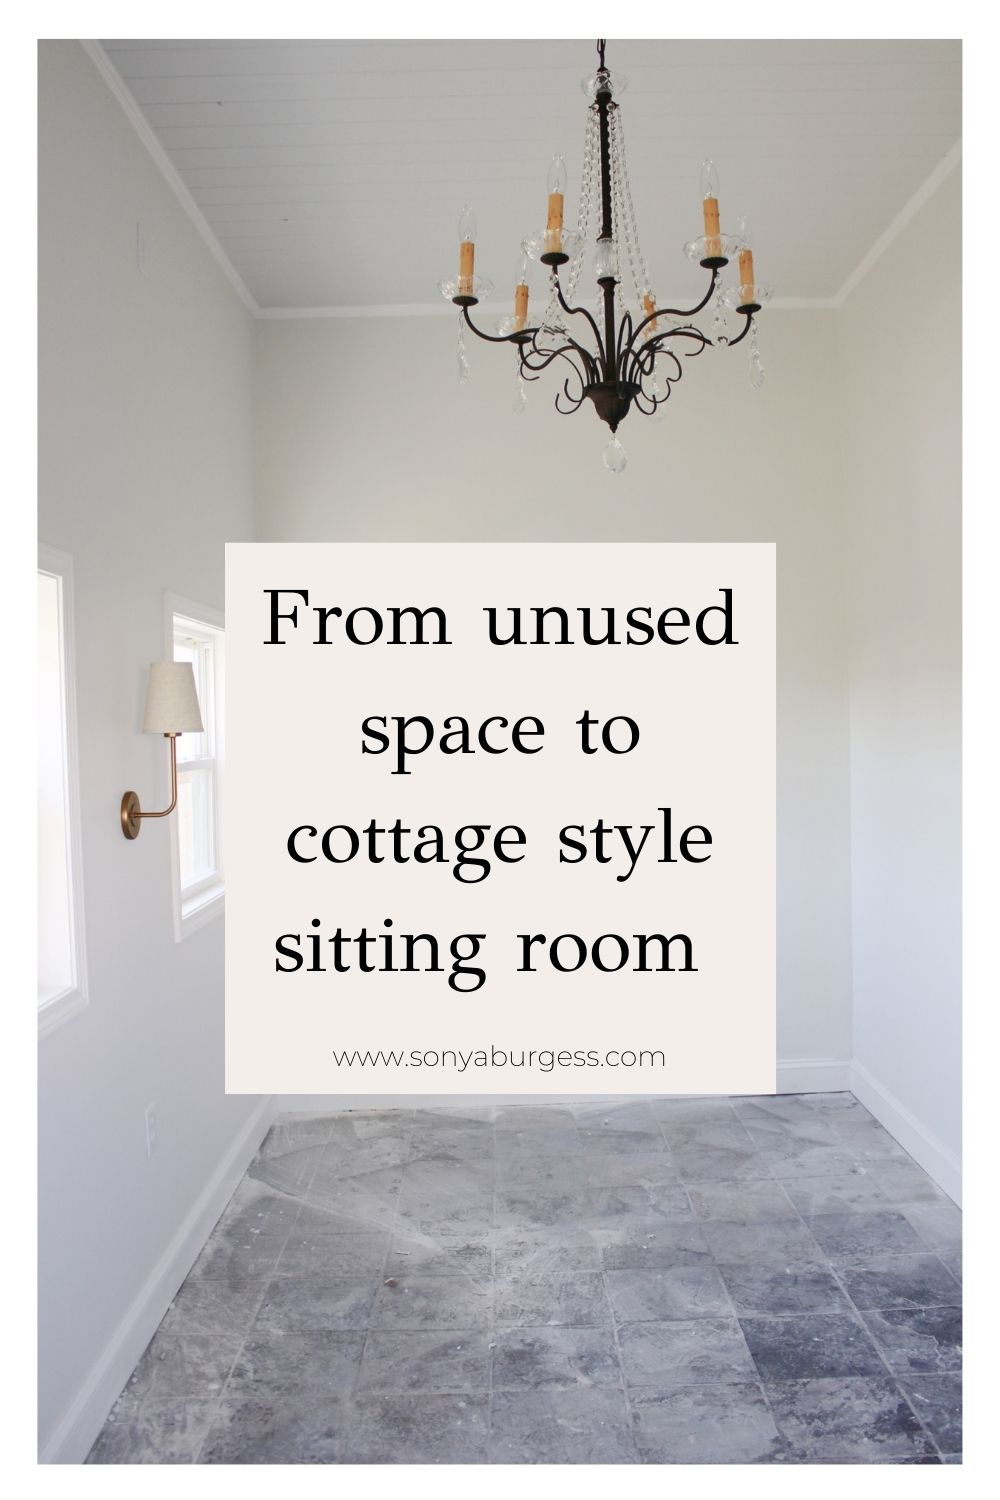 From unused space to cottage style sitting room